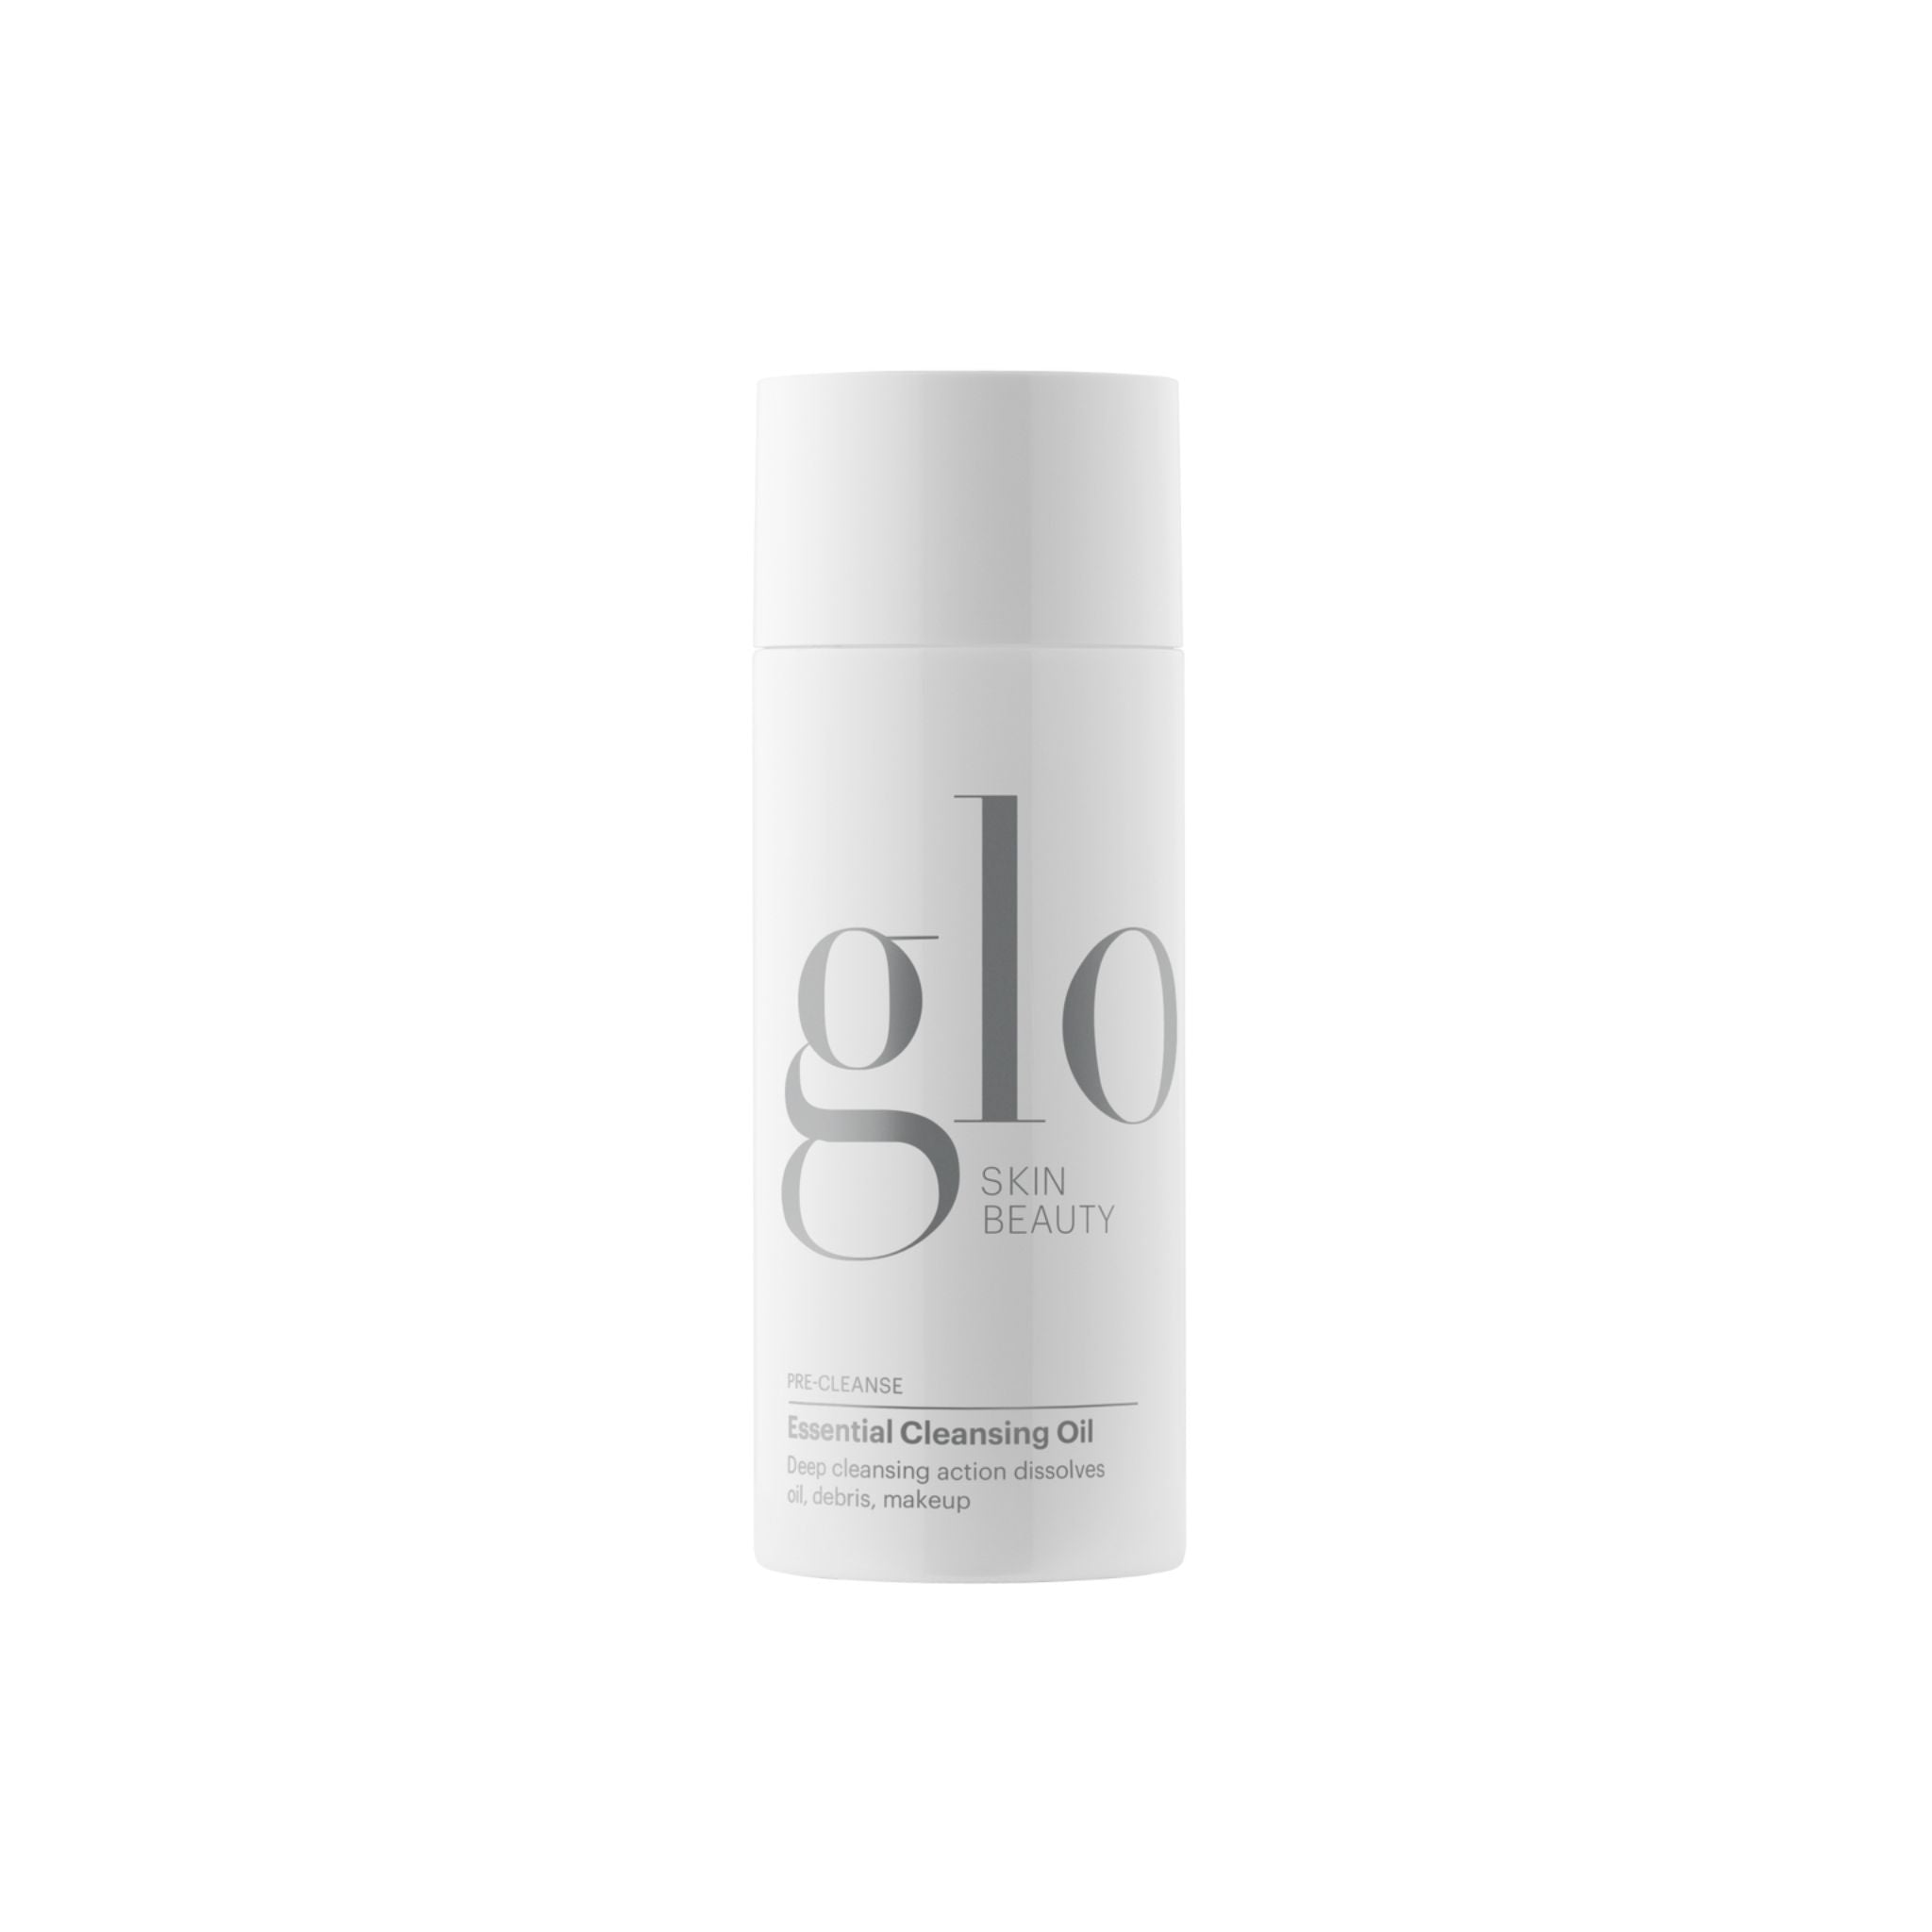 Glo Skin Beauty - Essential Cleansing Oil